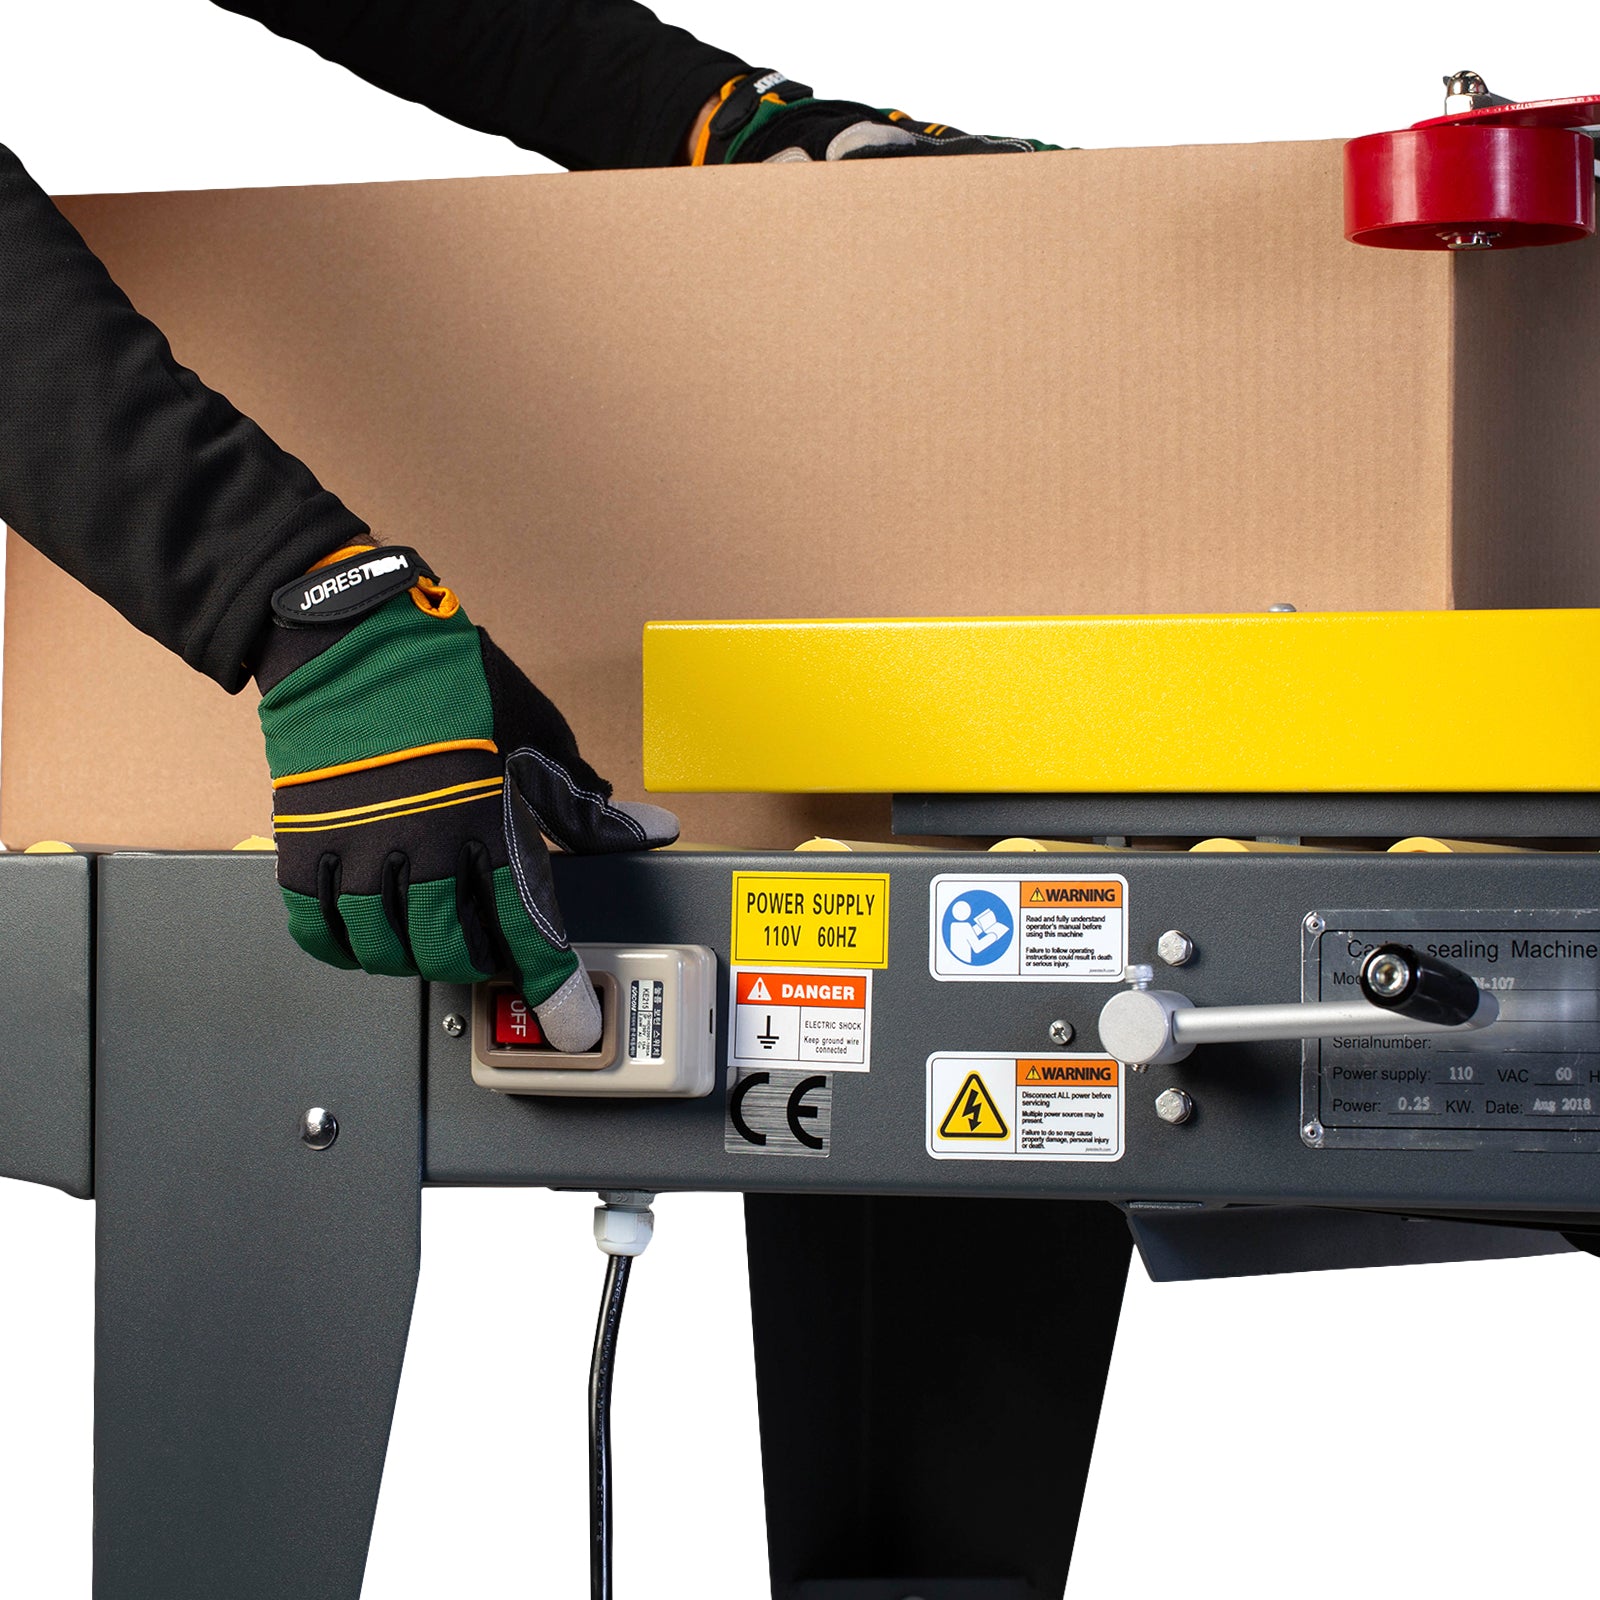 operator wearing green and orange pushing button and inserting brown cardboard box into case sealer machine with side traction